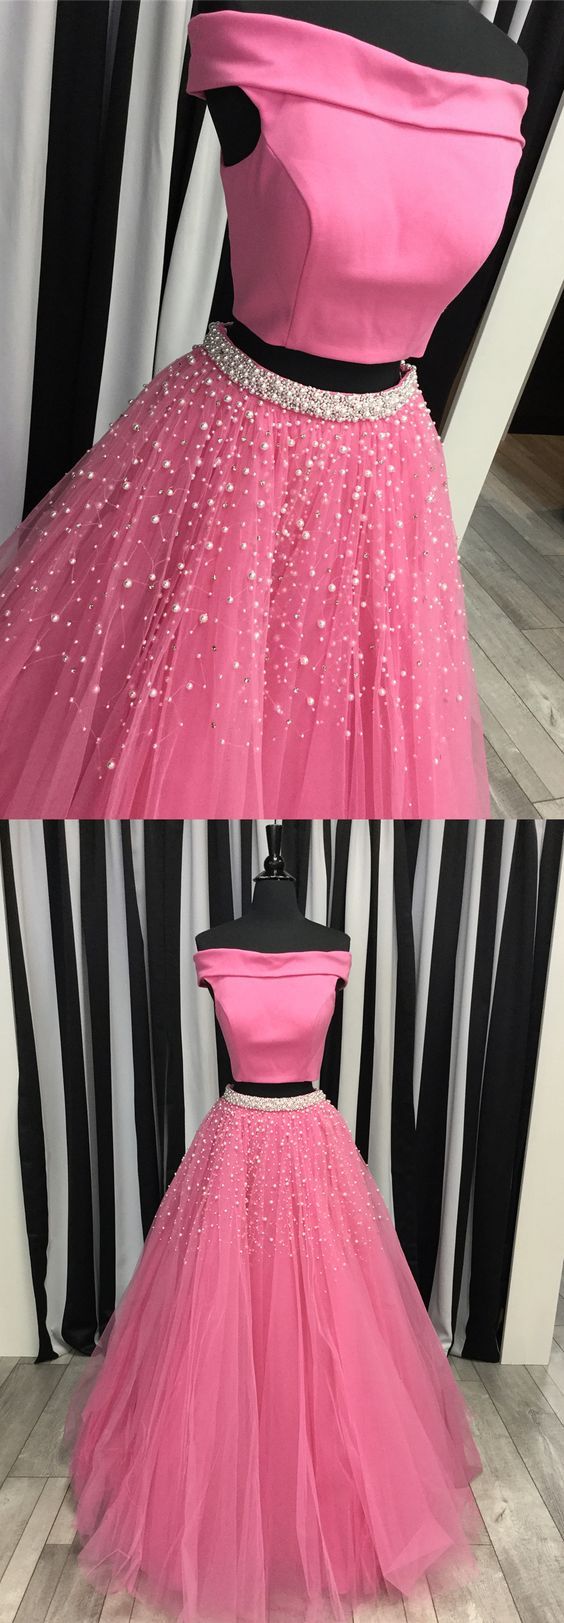 Marvelous Pink Two Piece Prom Dresses Featuring Boat Neck And Tulle Skirt